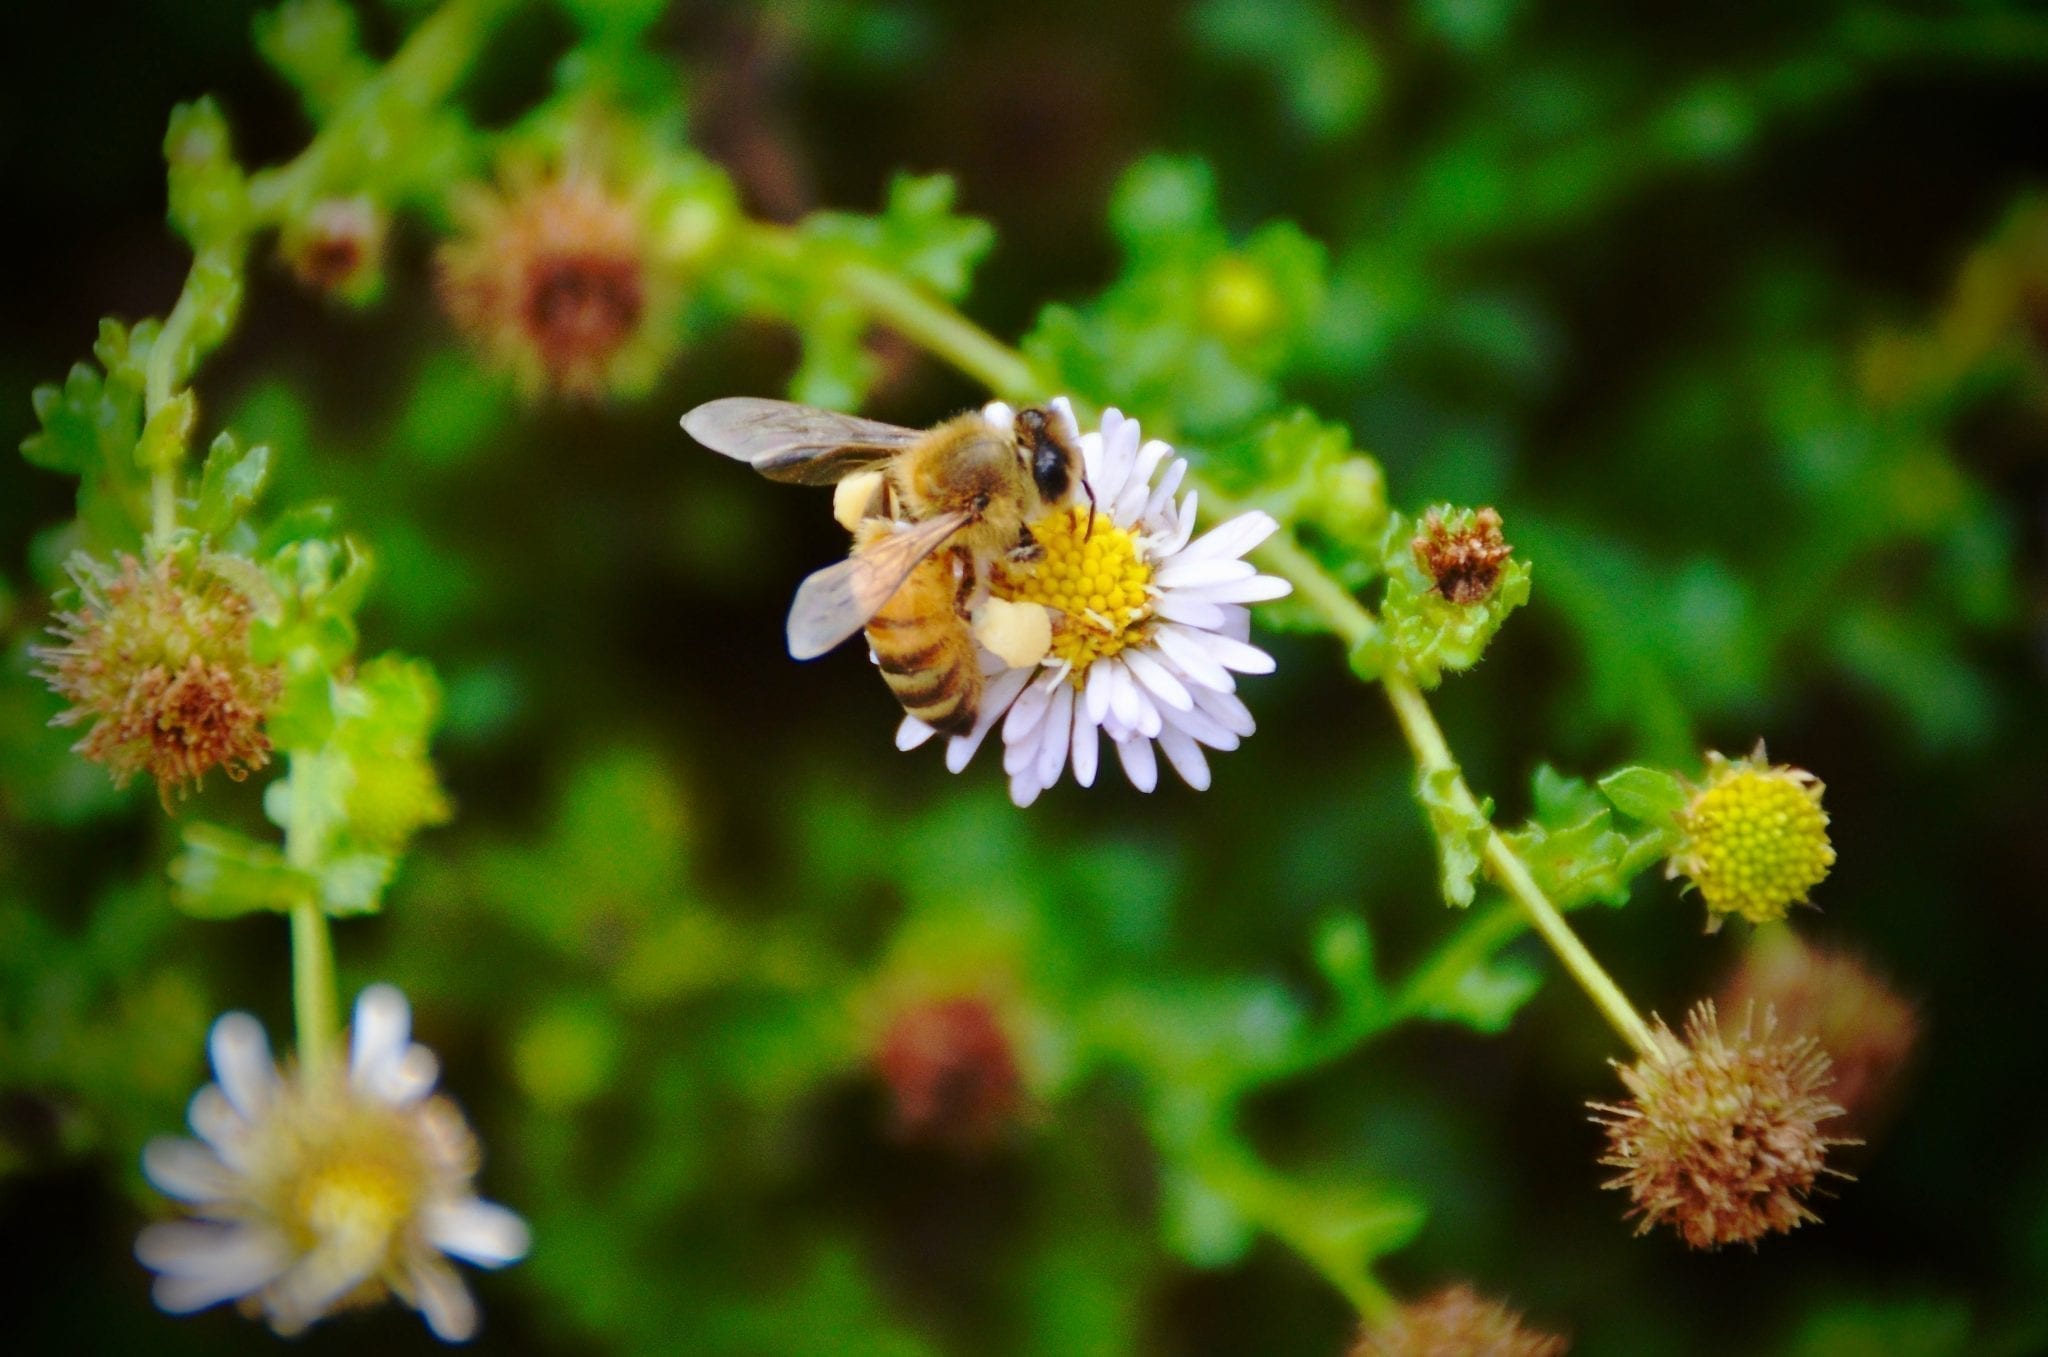 Ten years after the crisis, what is happening to the world's bees?